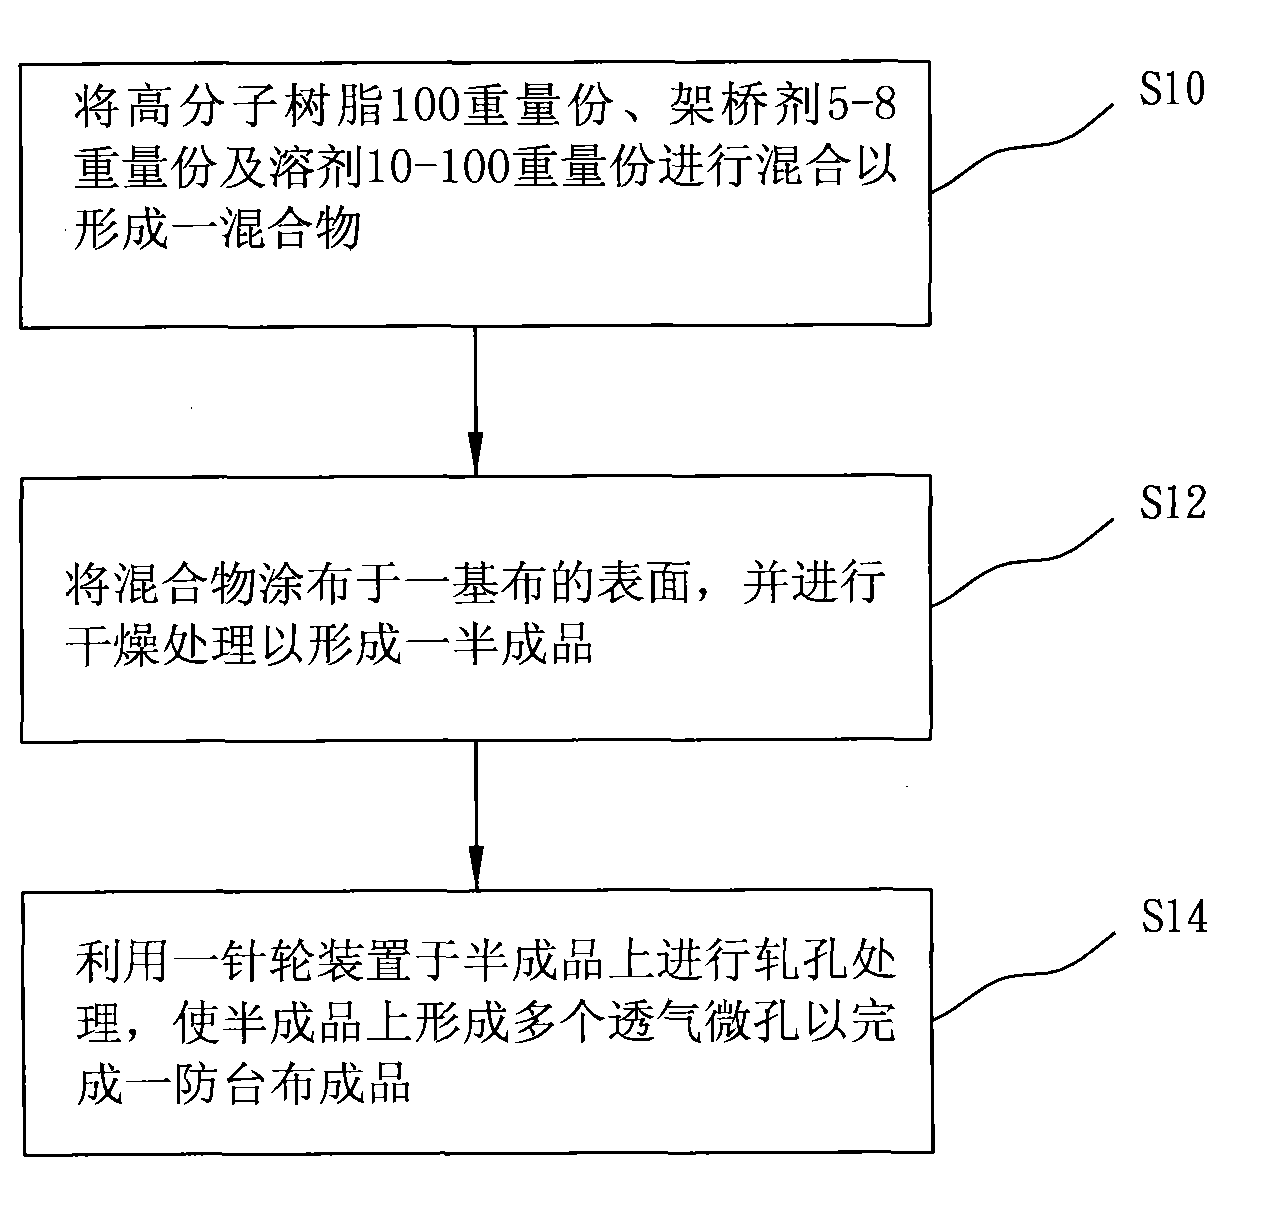 Method for manufacturing high-strength typhoon prevention cloth